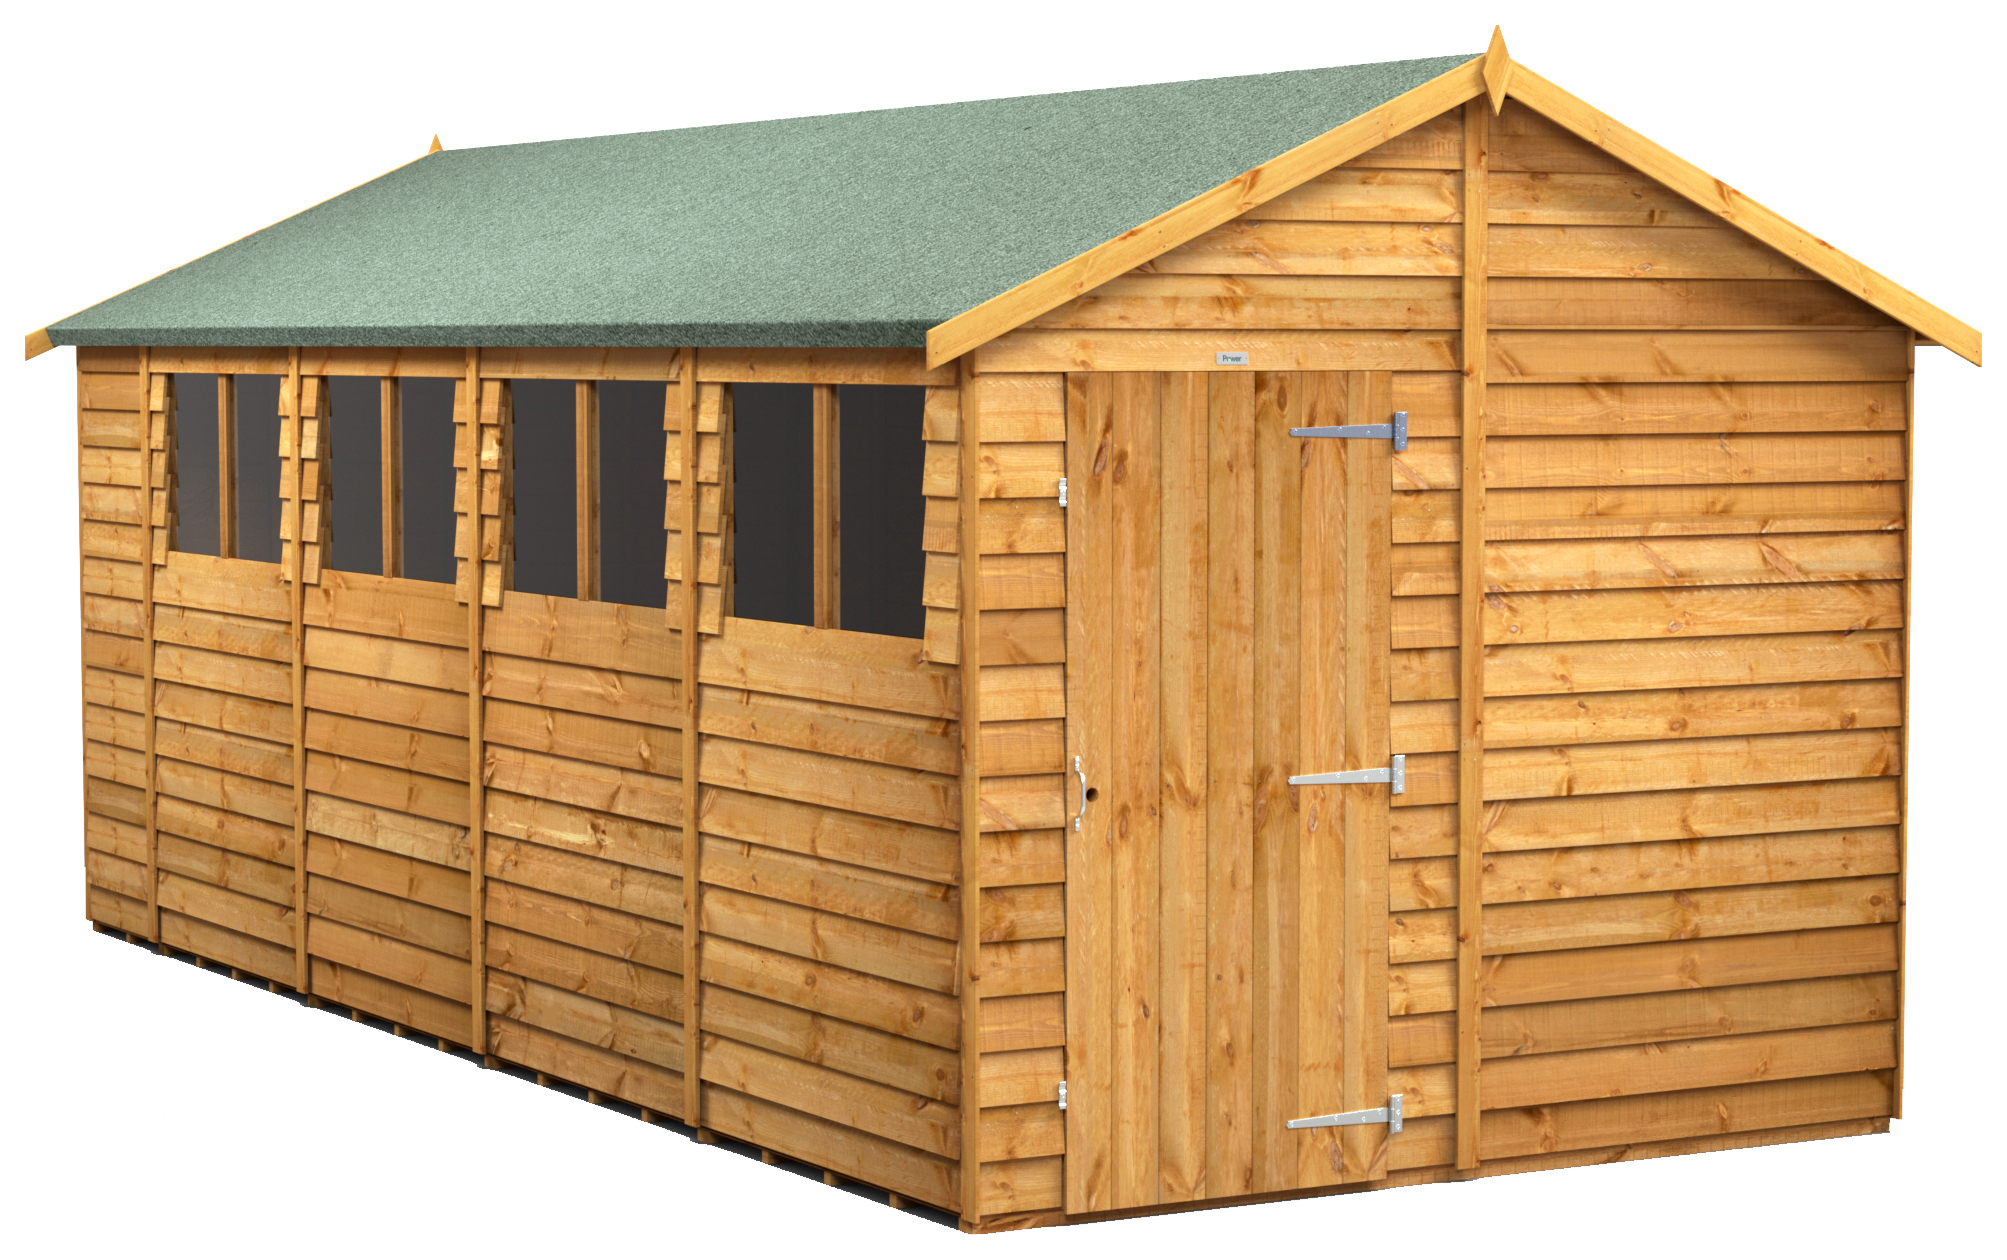 Power Sheds 18 x 8ft Apex Overlap Dip Treated Shed